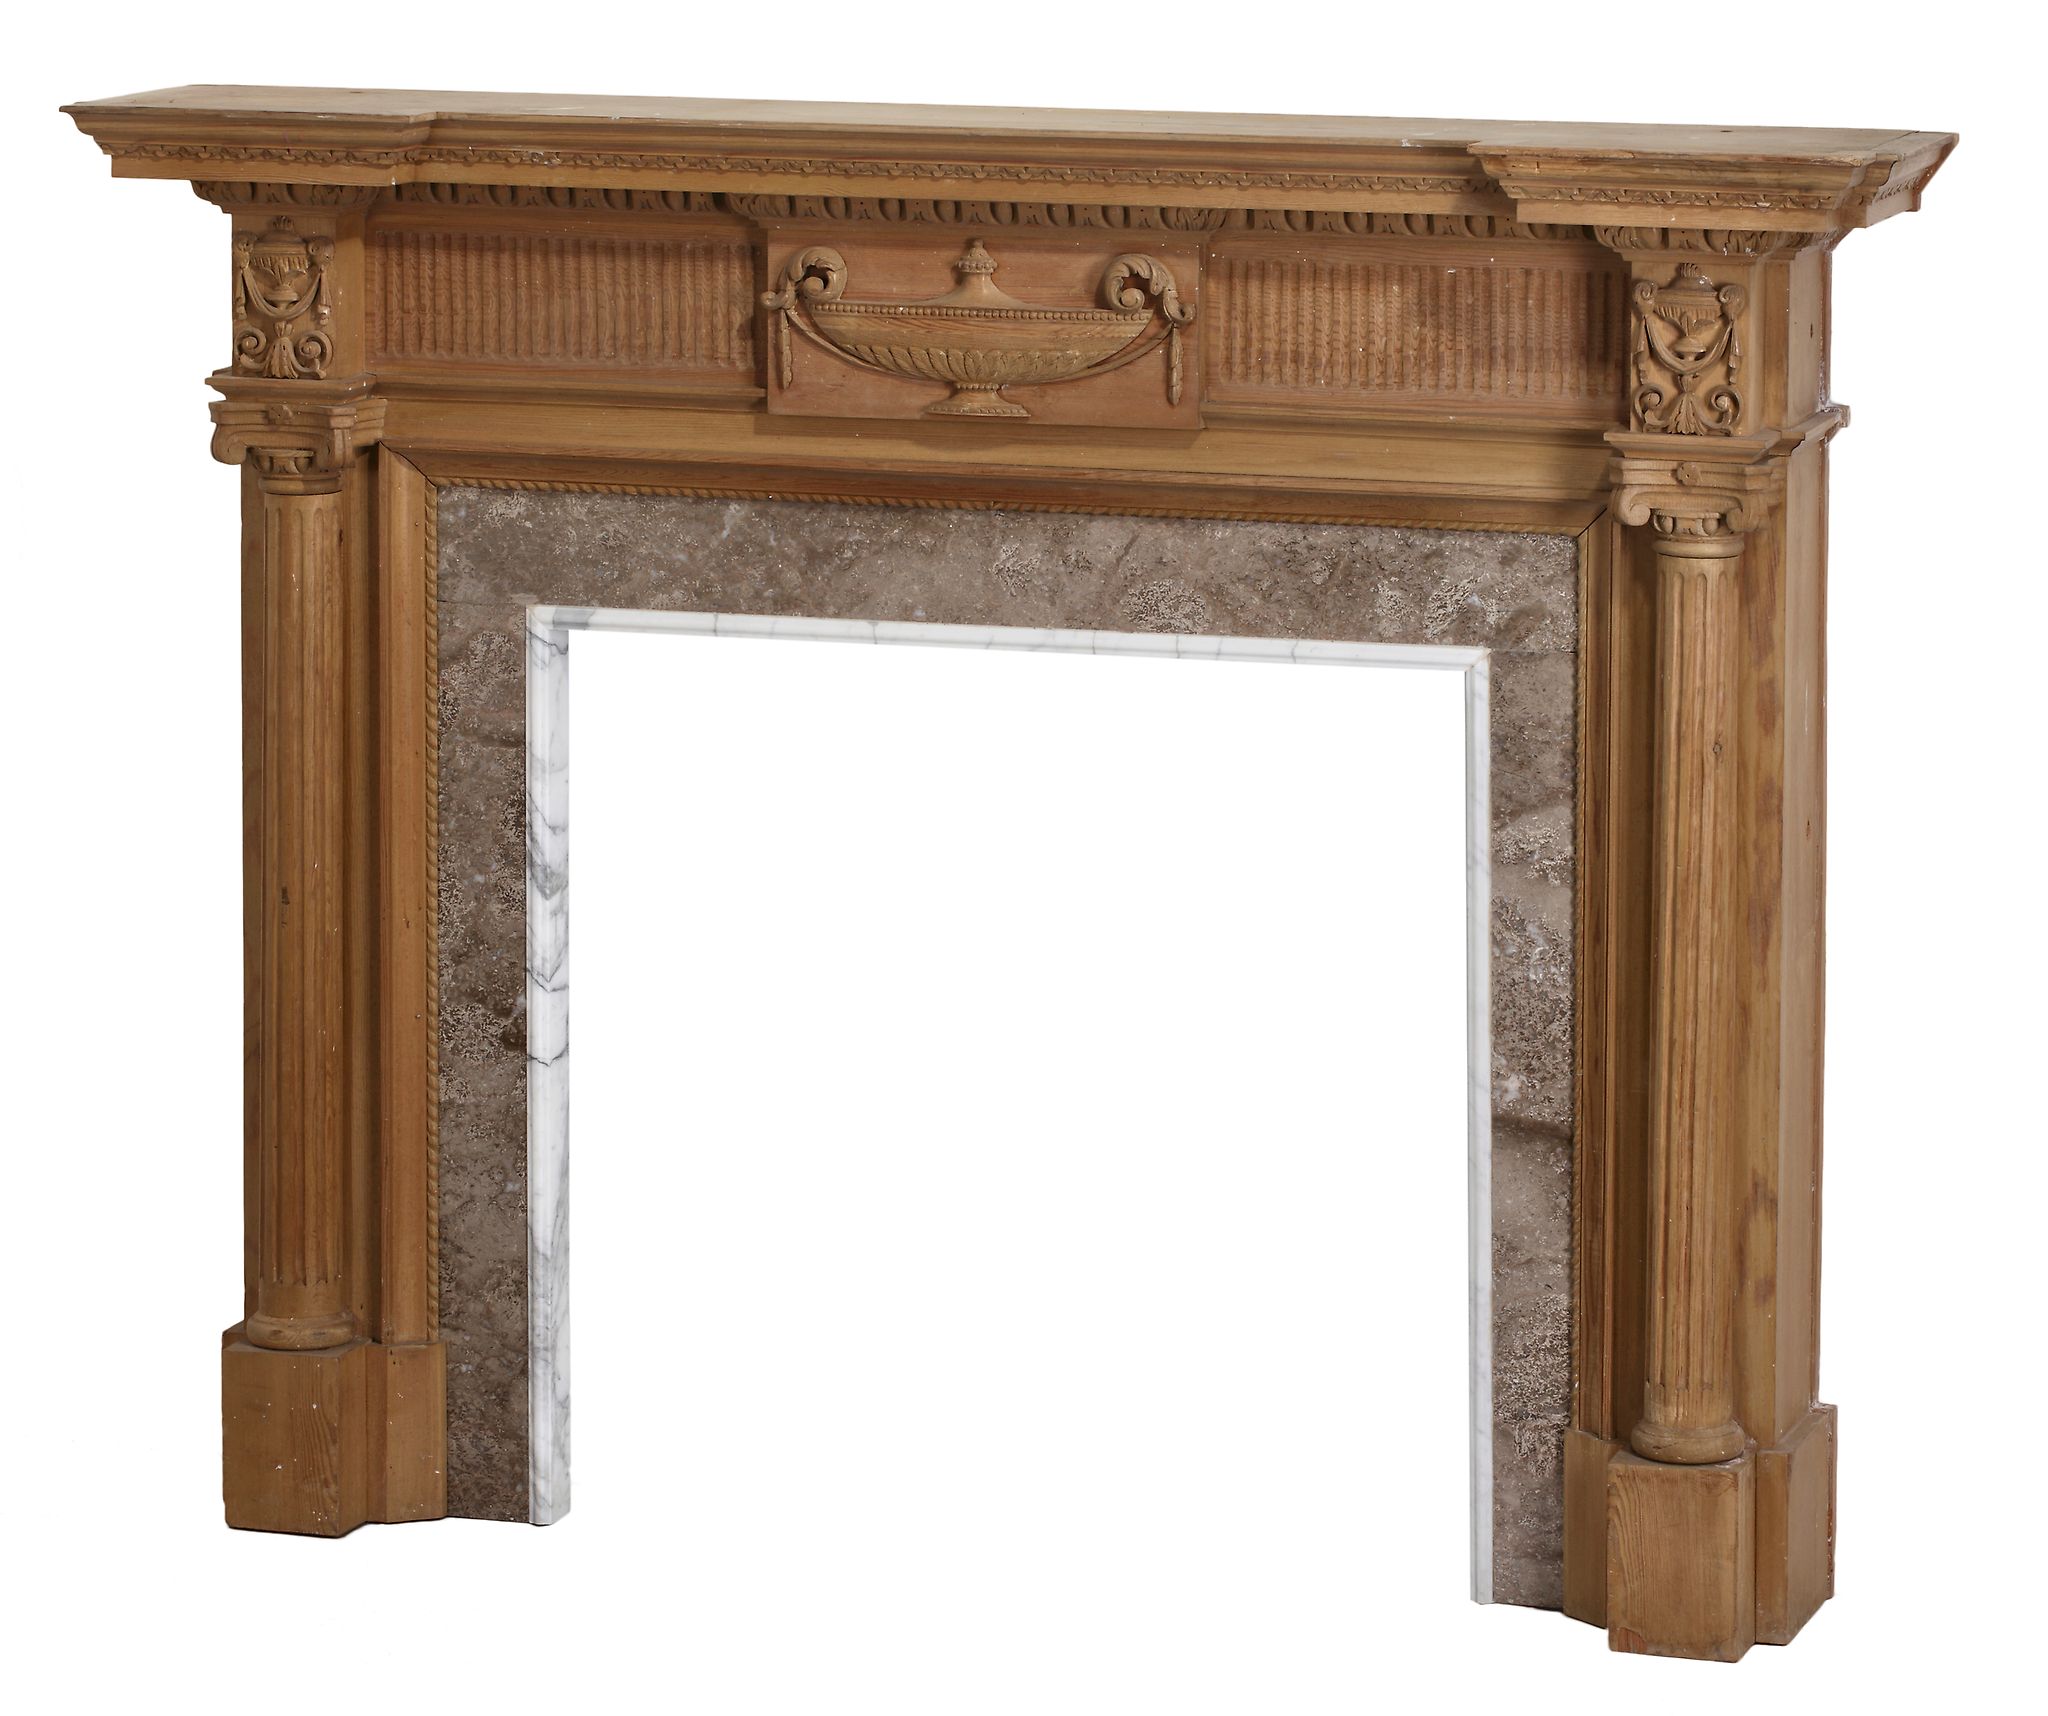 A carved pine chimneypiece in Neoclassical style, 19th century  A carved pine chimneypiece in